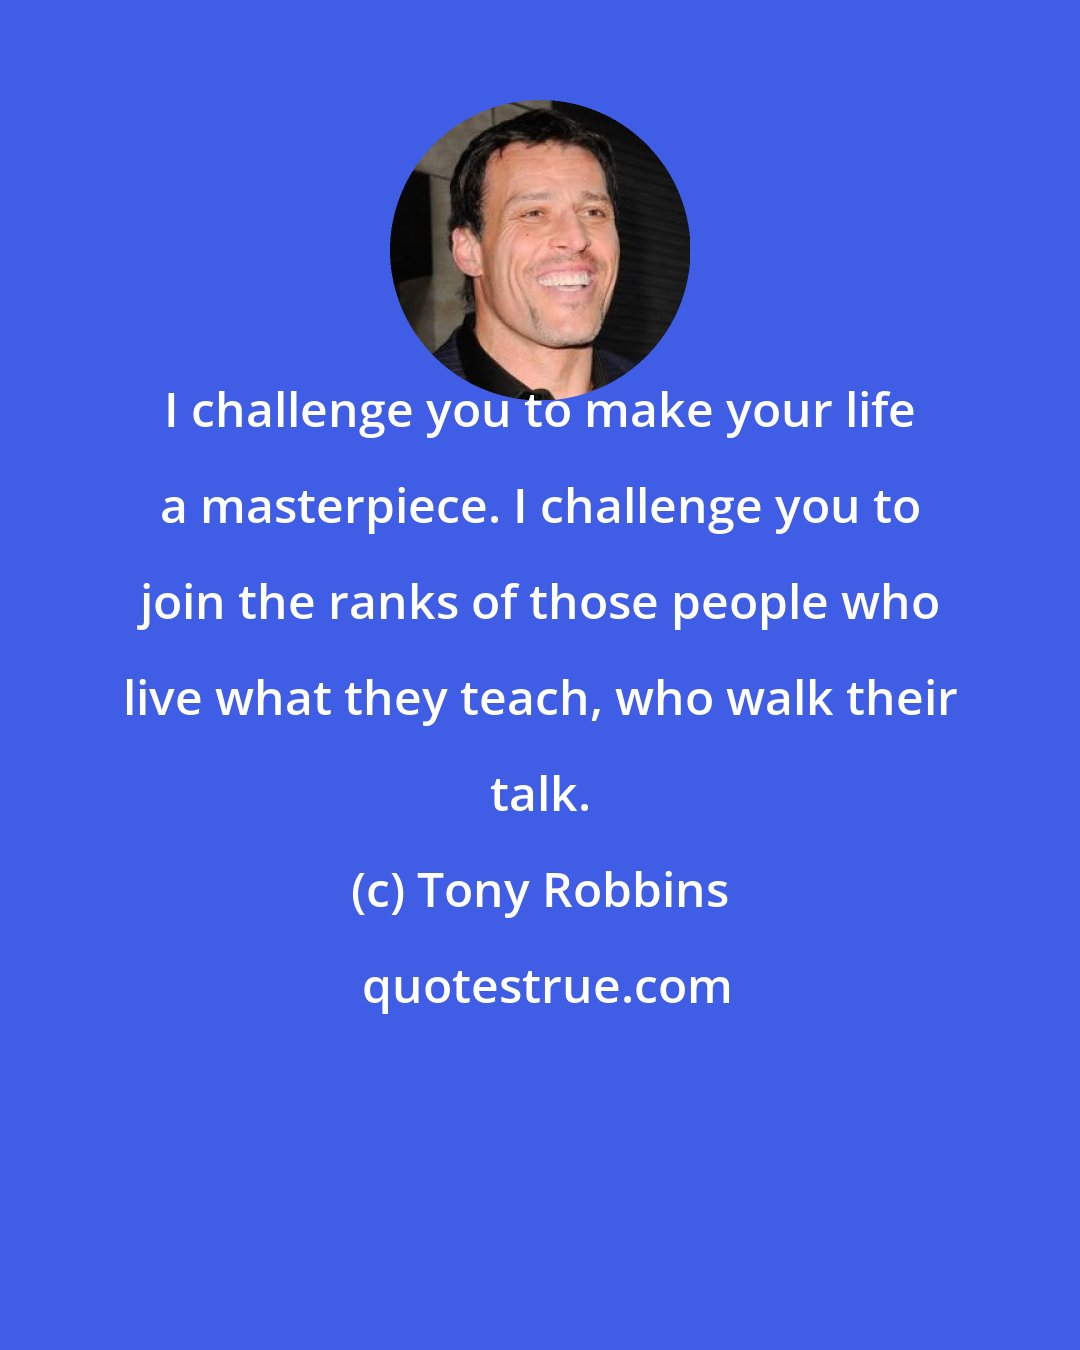 Tony Robbins: I challenge you to make your life a masterpiece. I challenge you to join the ranks of those people who live what they teach, who walk their talk.